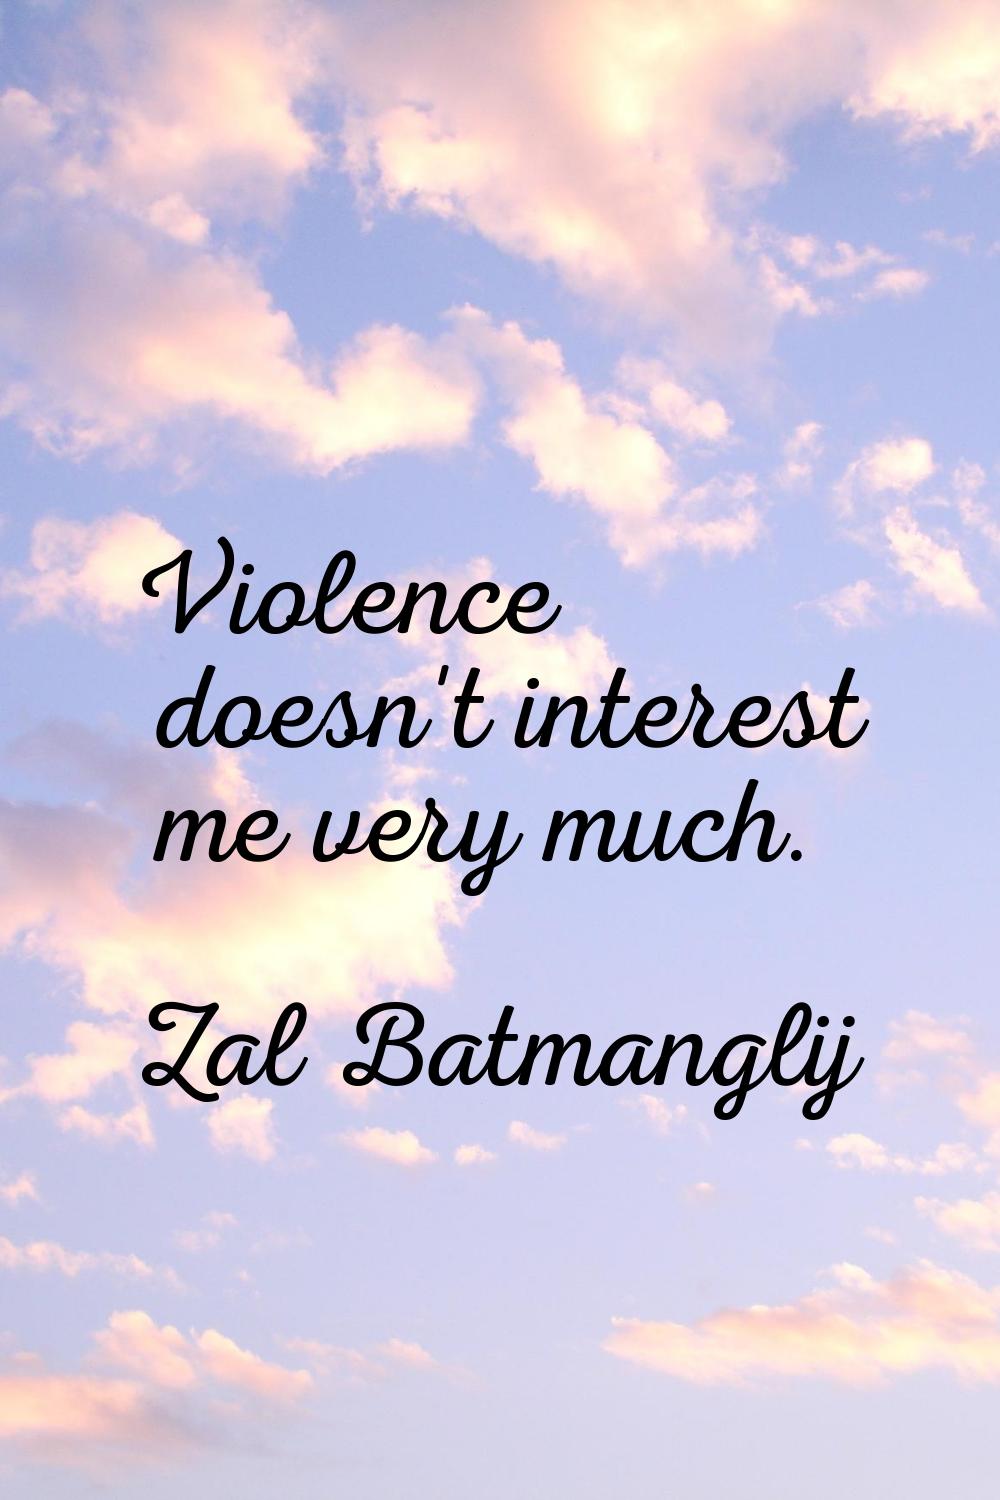 Violence doesn't interest me very much.